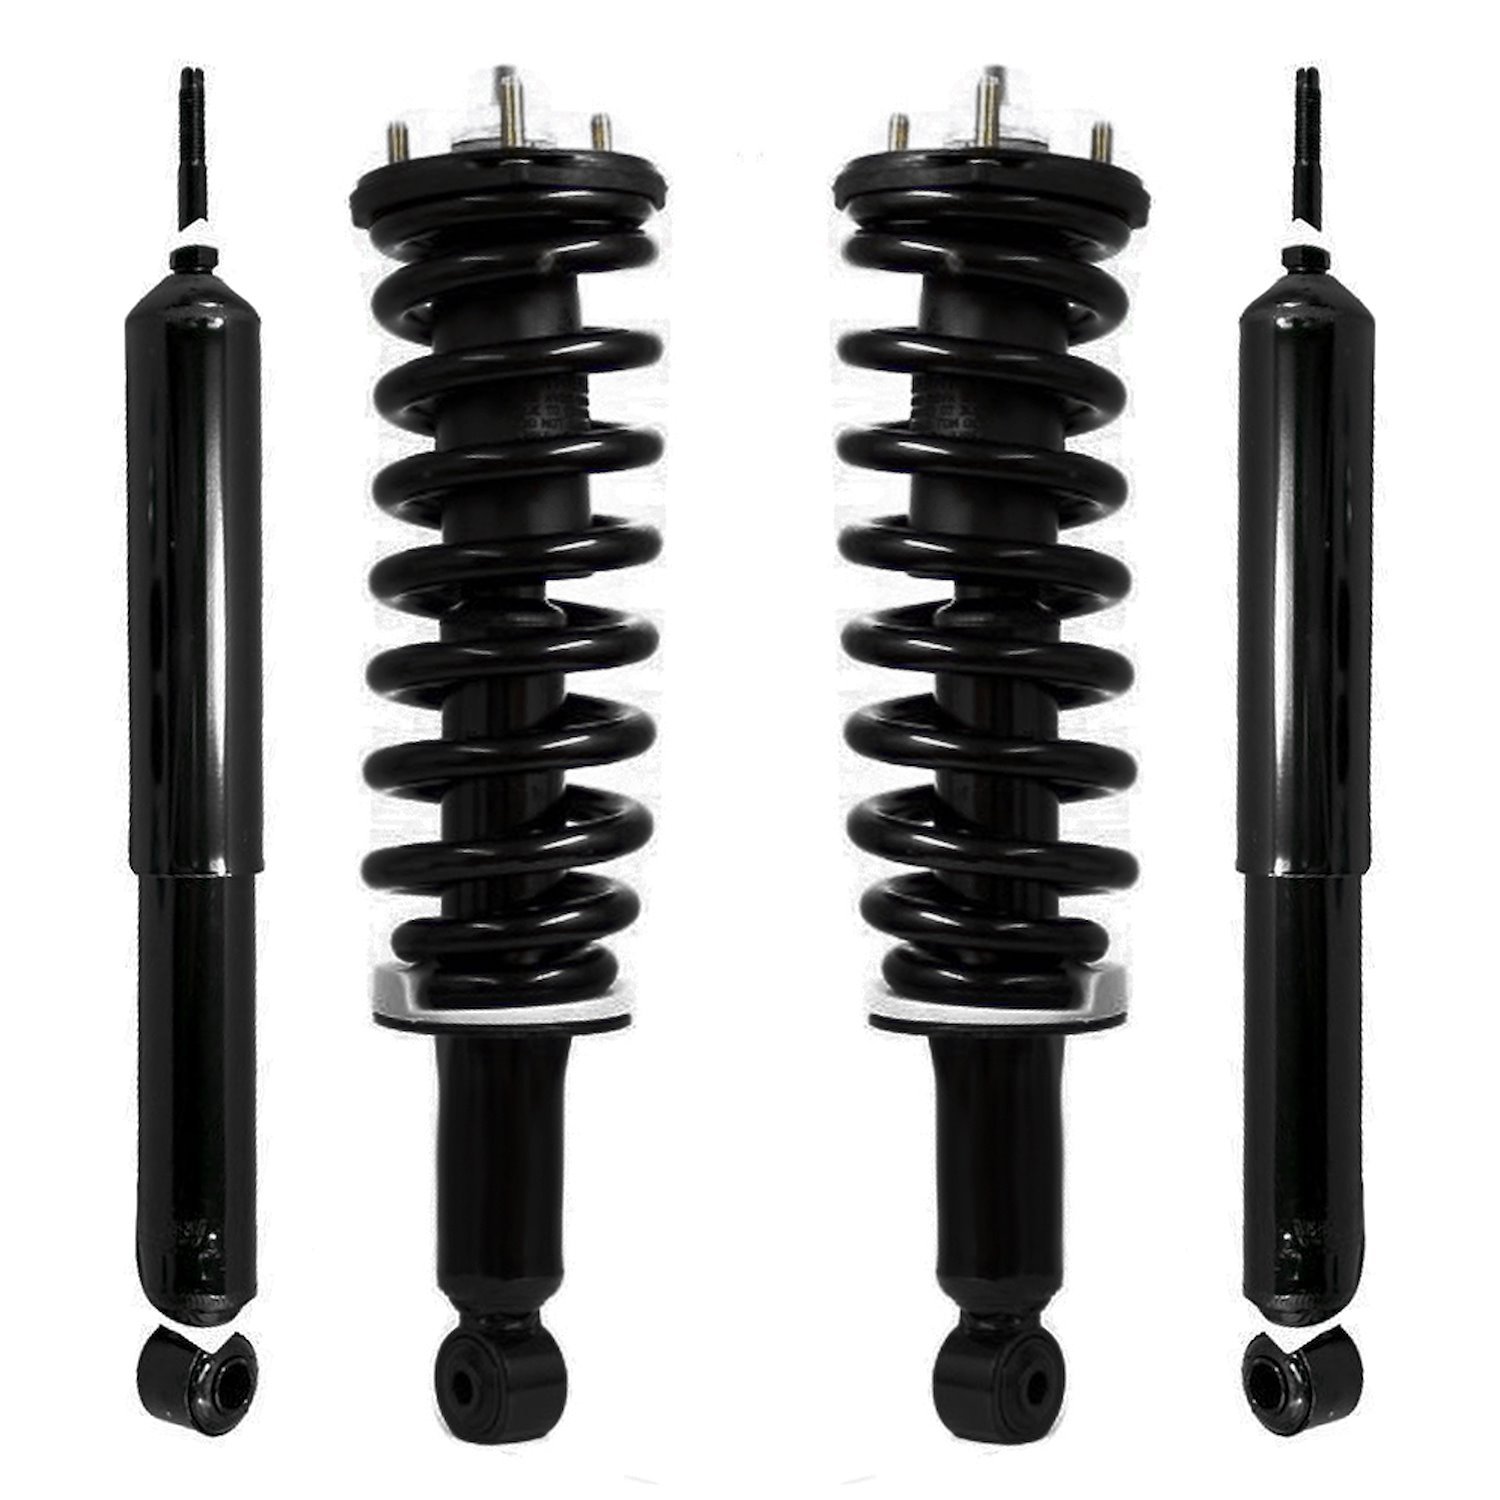 4-11381-254090-001 Front & Rear Suspension Strut & Coil Spring Assembly Fits Select Toyota Sequoia